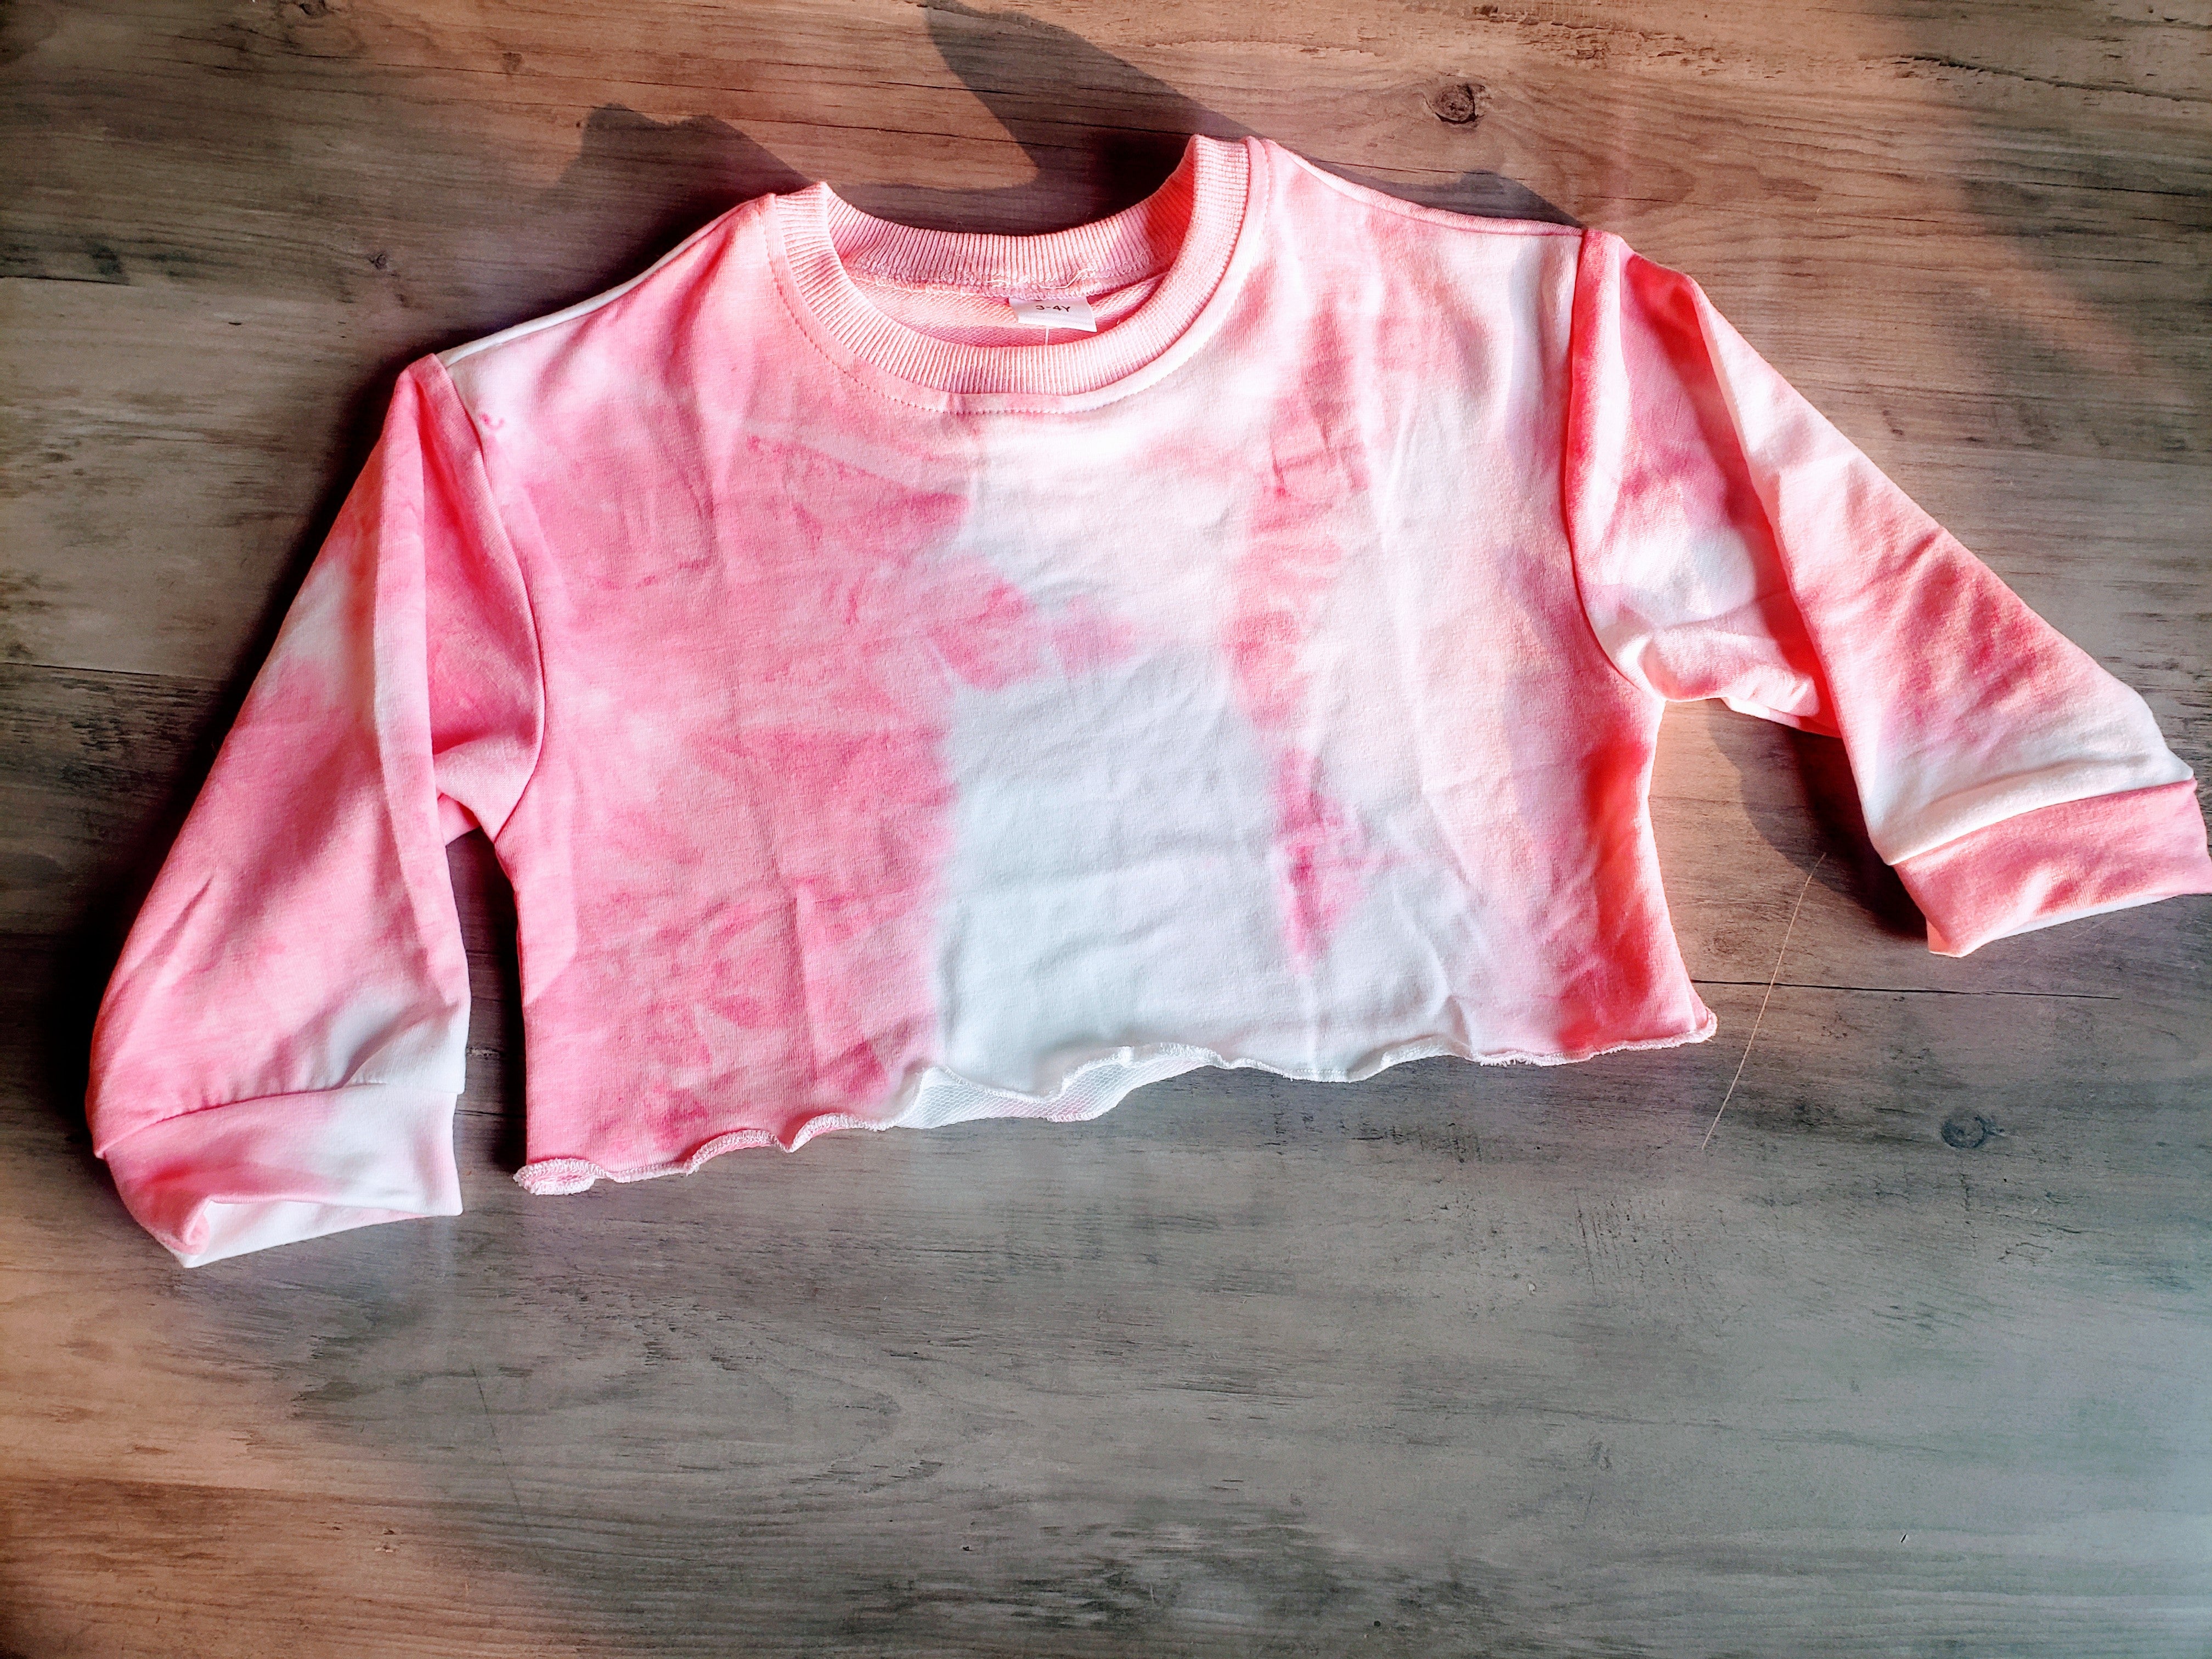 Kid's Cropped Top Pink Technical Jersey with Faded Toile de Jouy